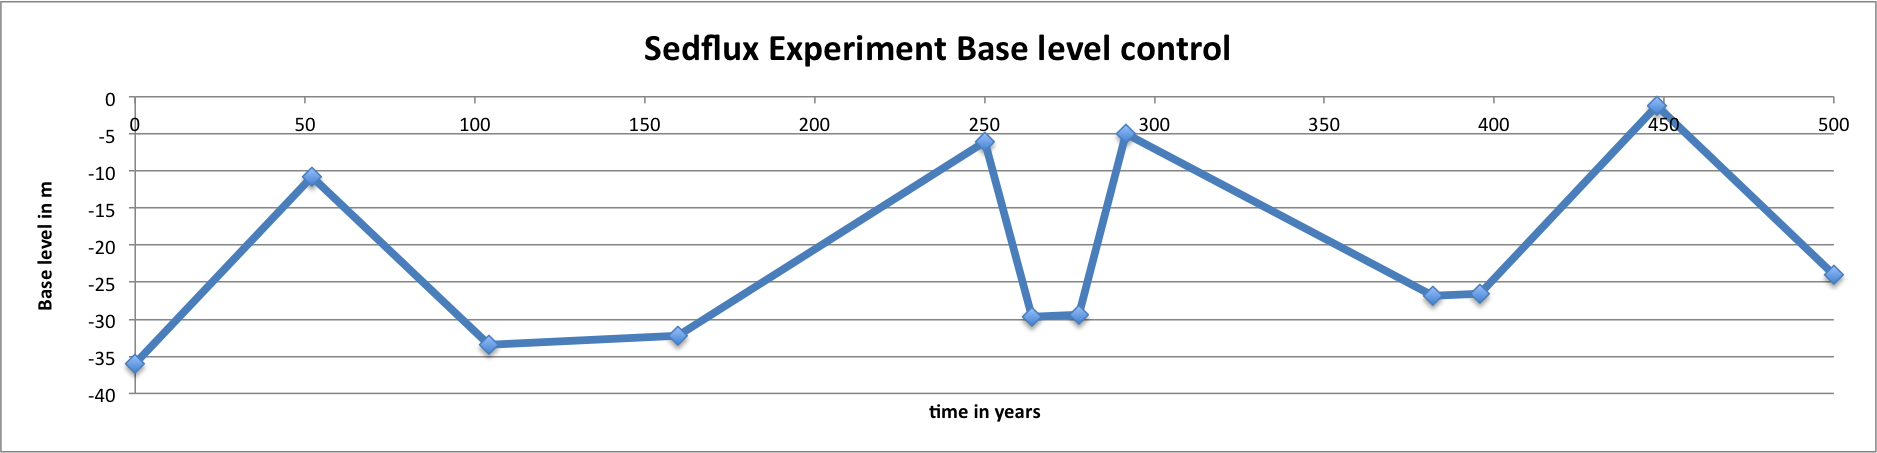 sea level curve inspired by tank experiment